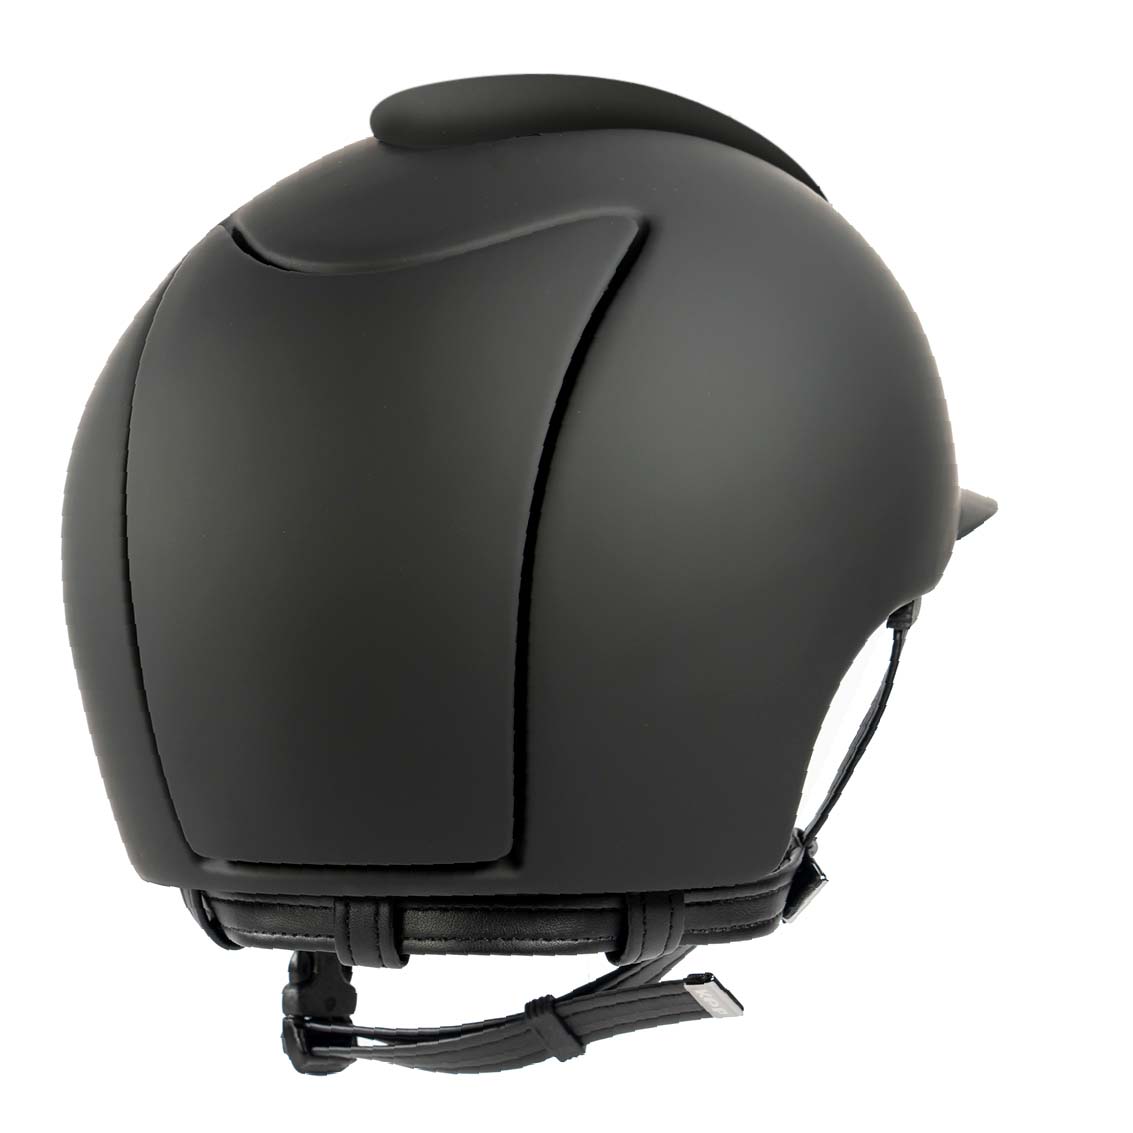 KEP black equestrian riding helmet with matte finish and chinstrap.